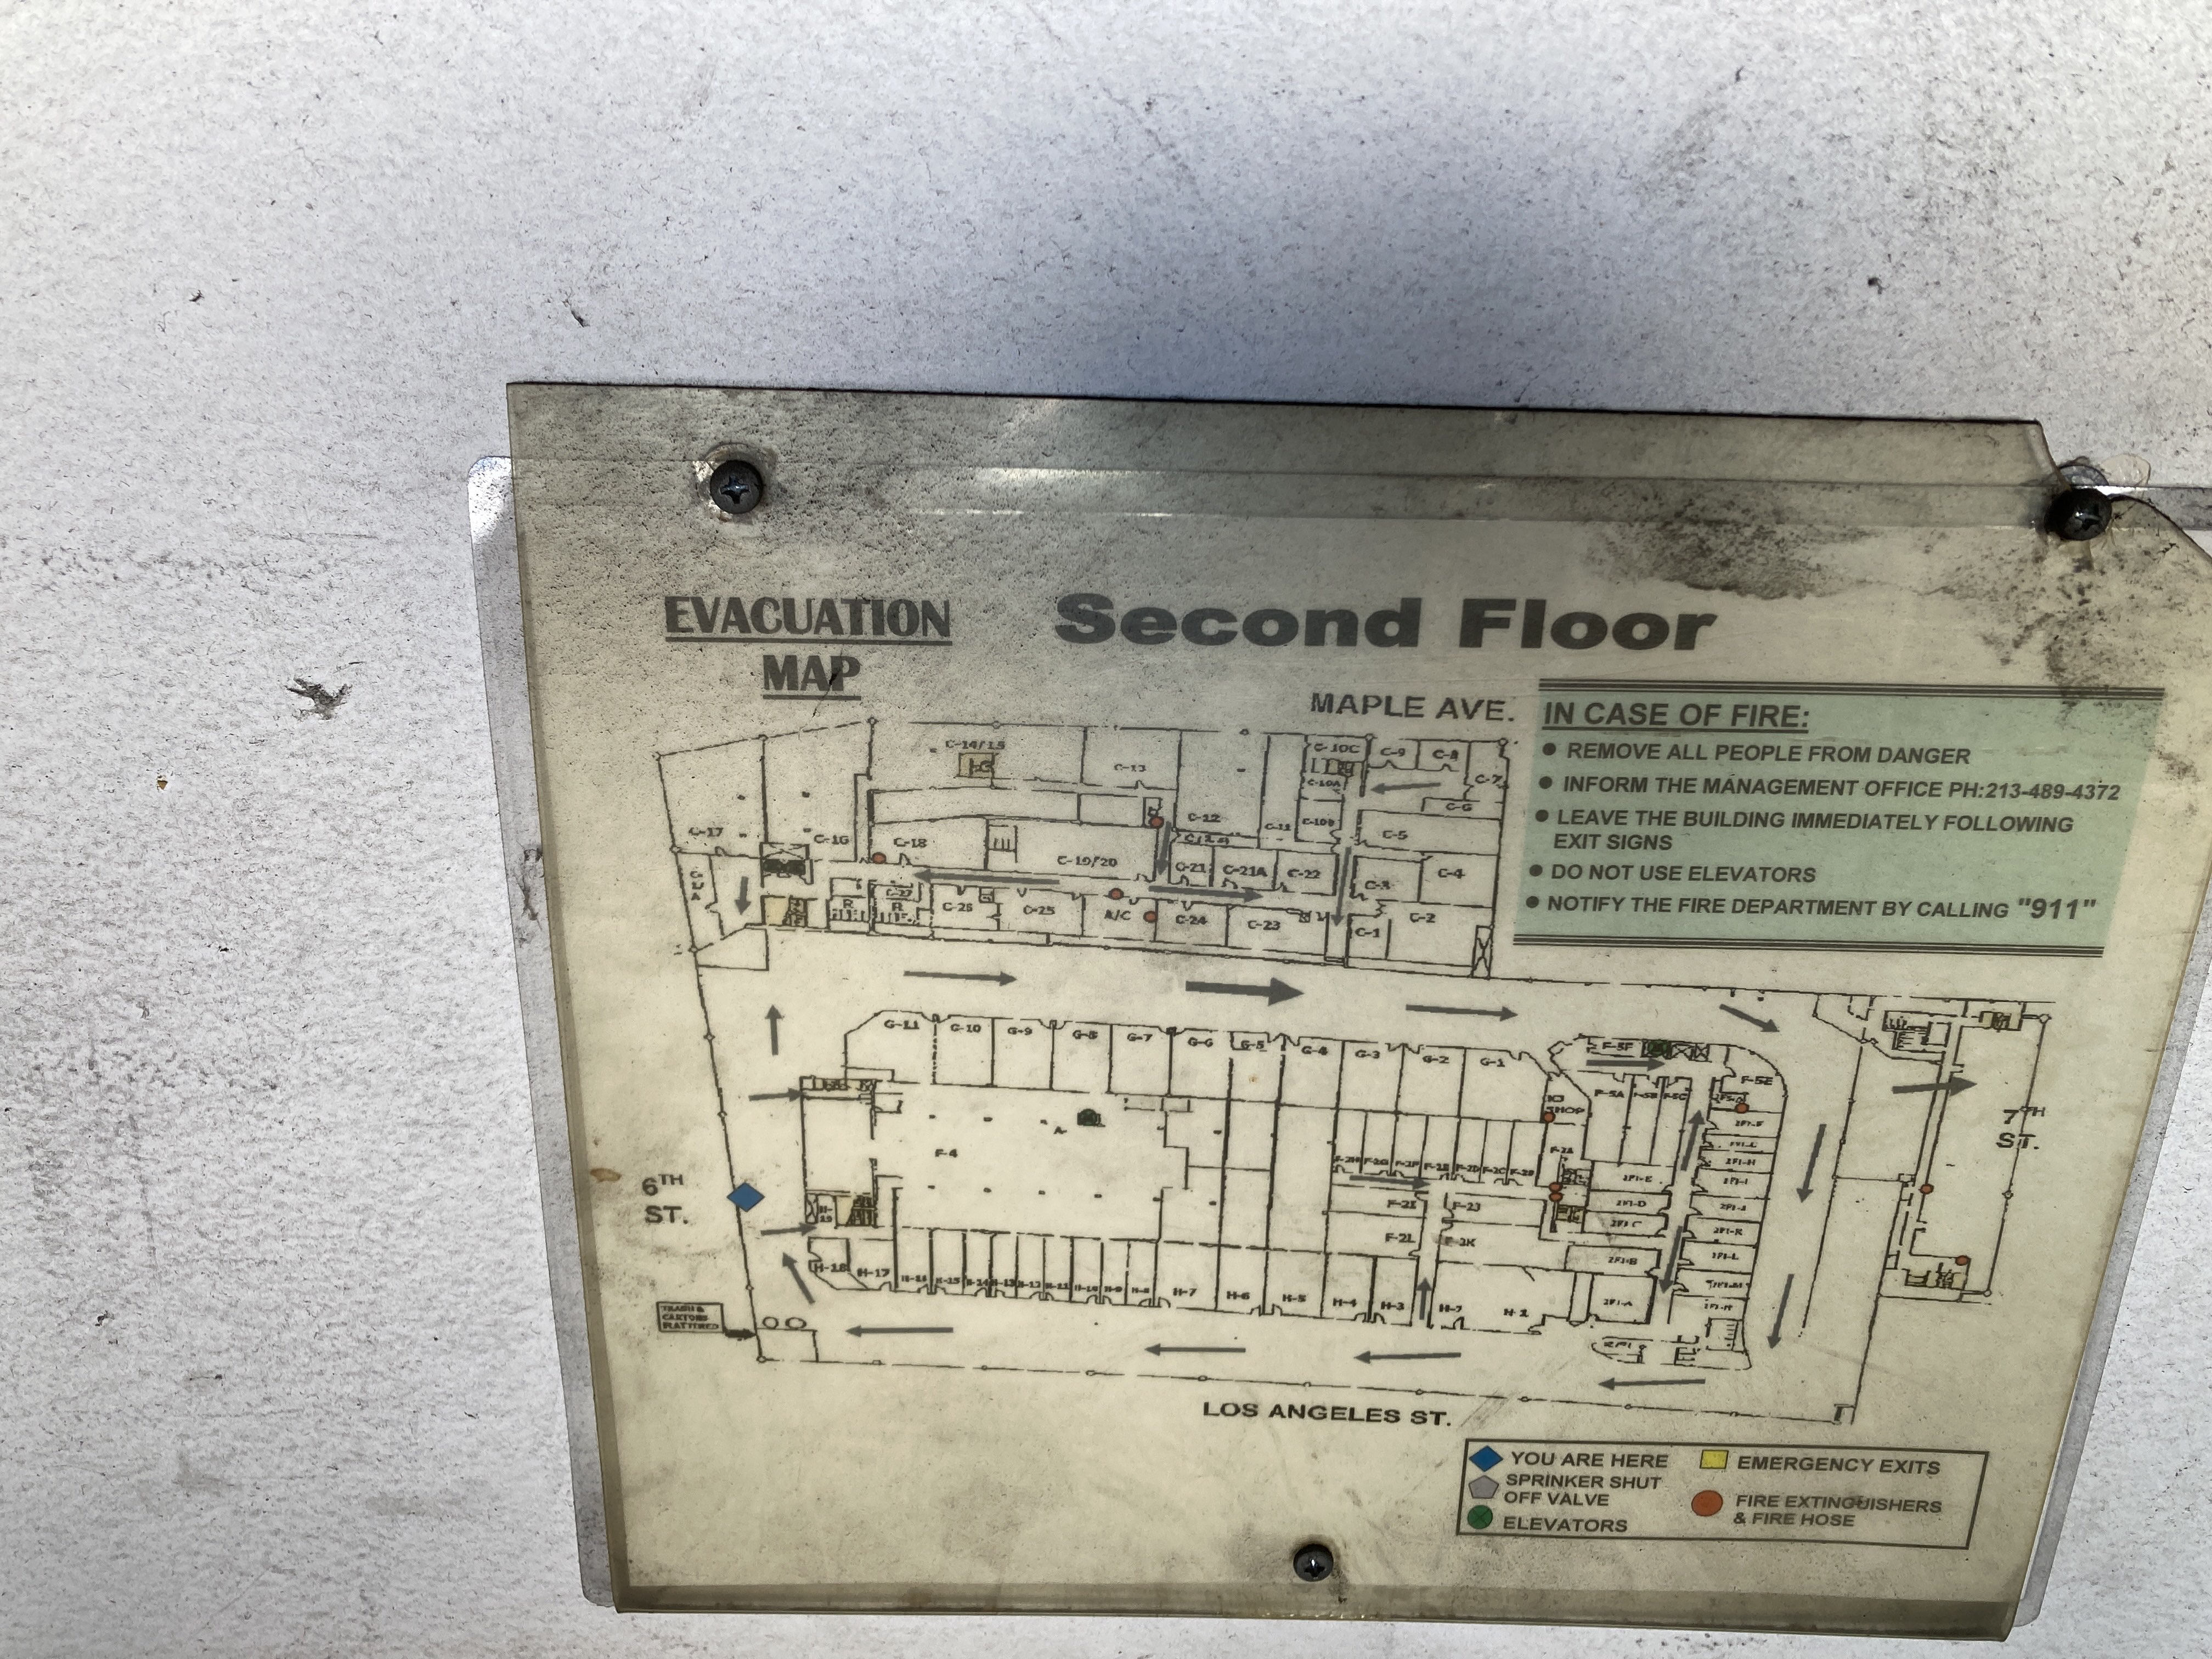 printed evacuation map of the second floor of the building. there is a large loop for truck traffic, with many small internal rooms in the middle of it.